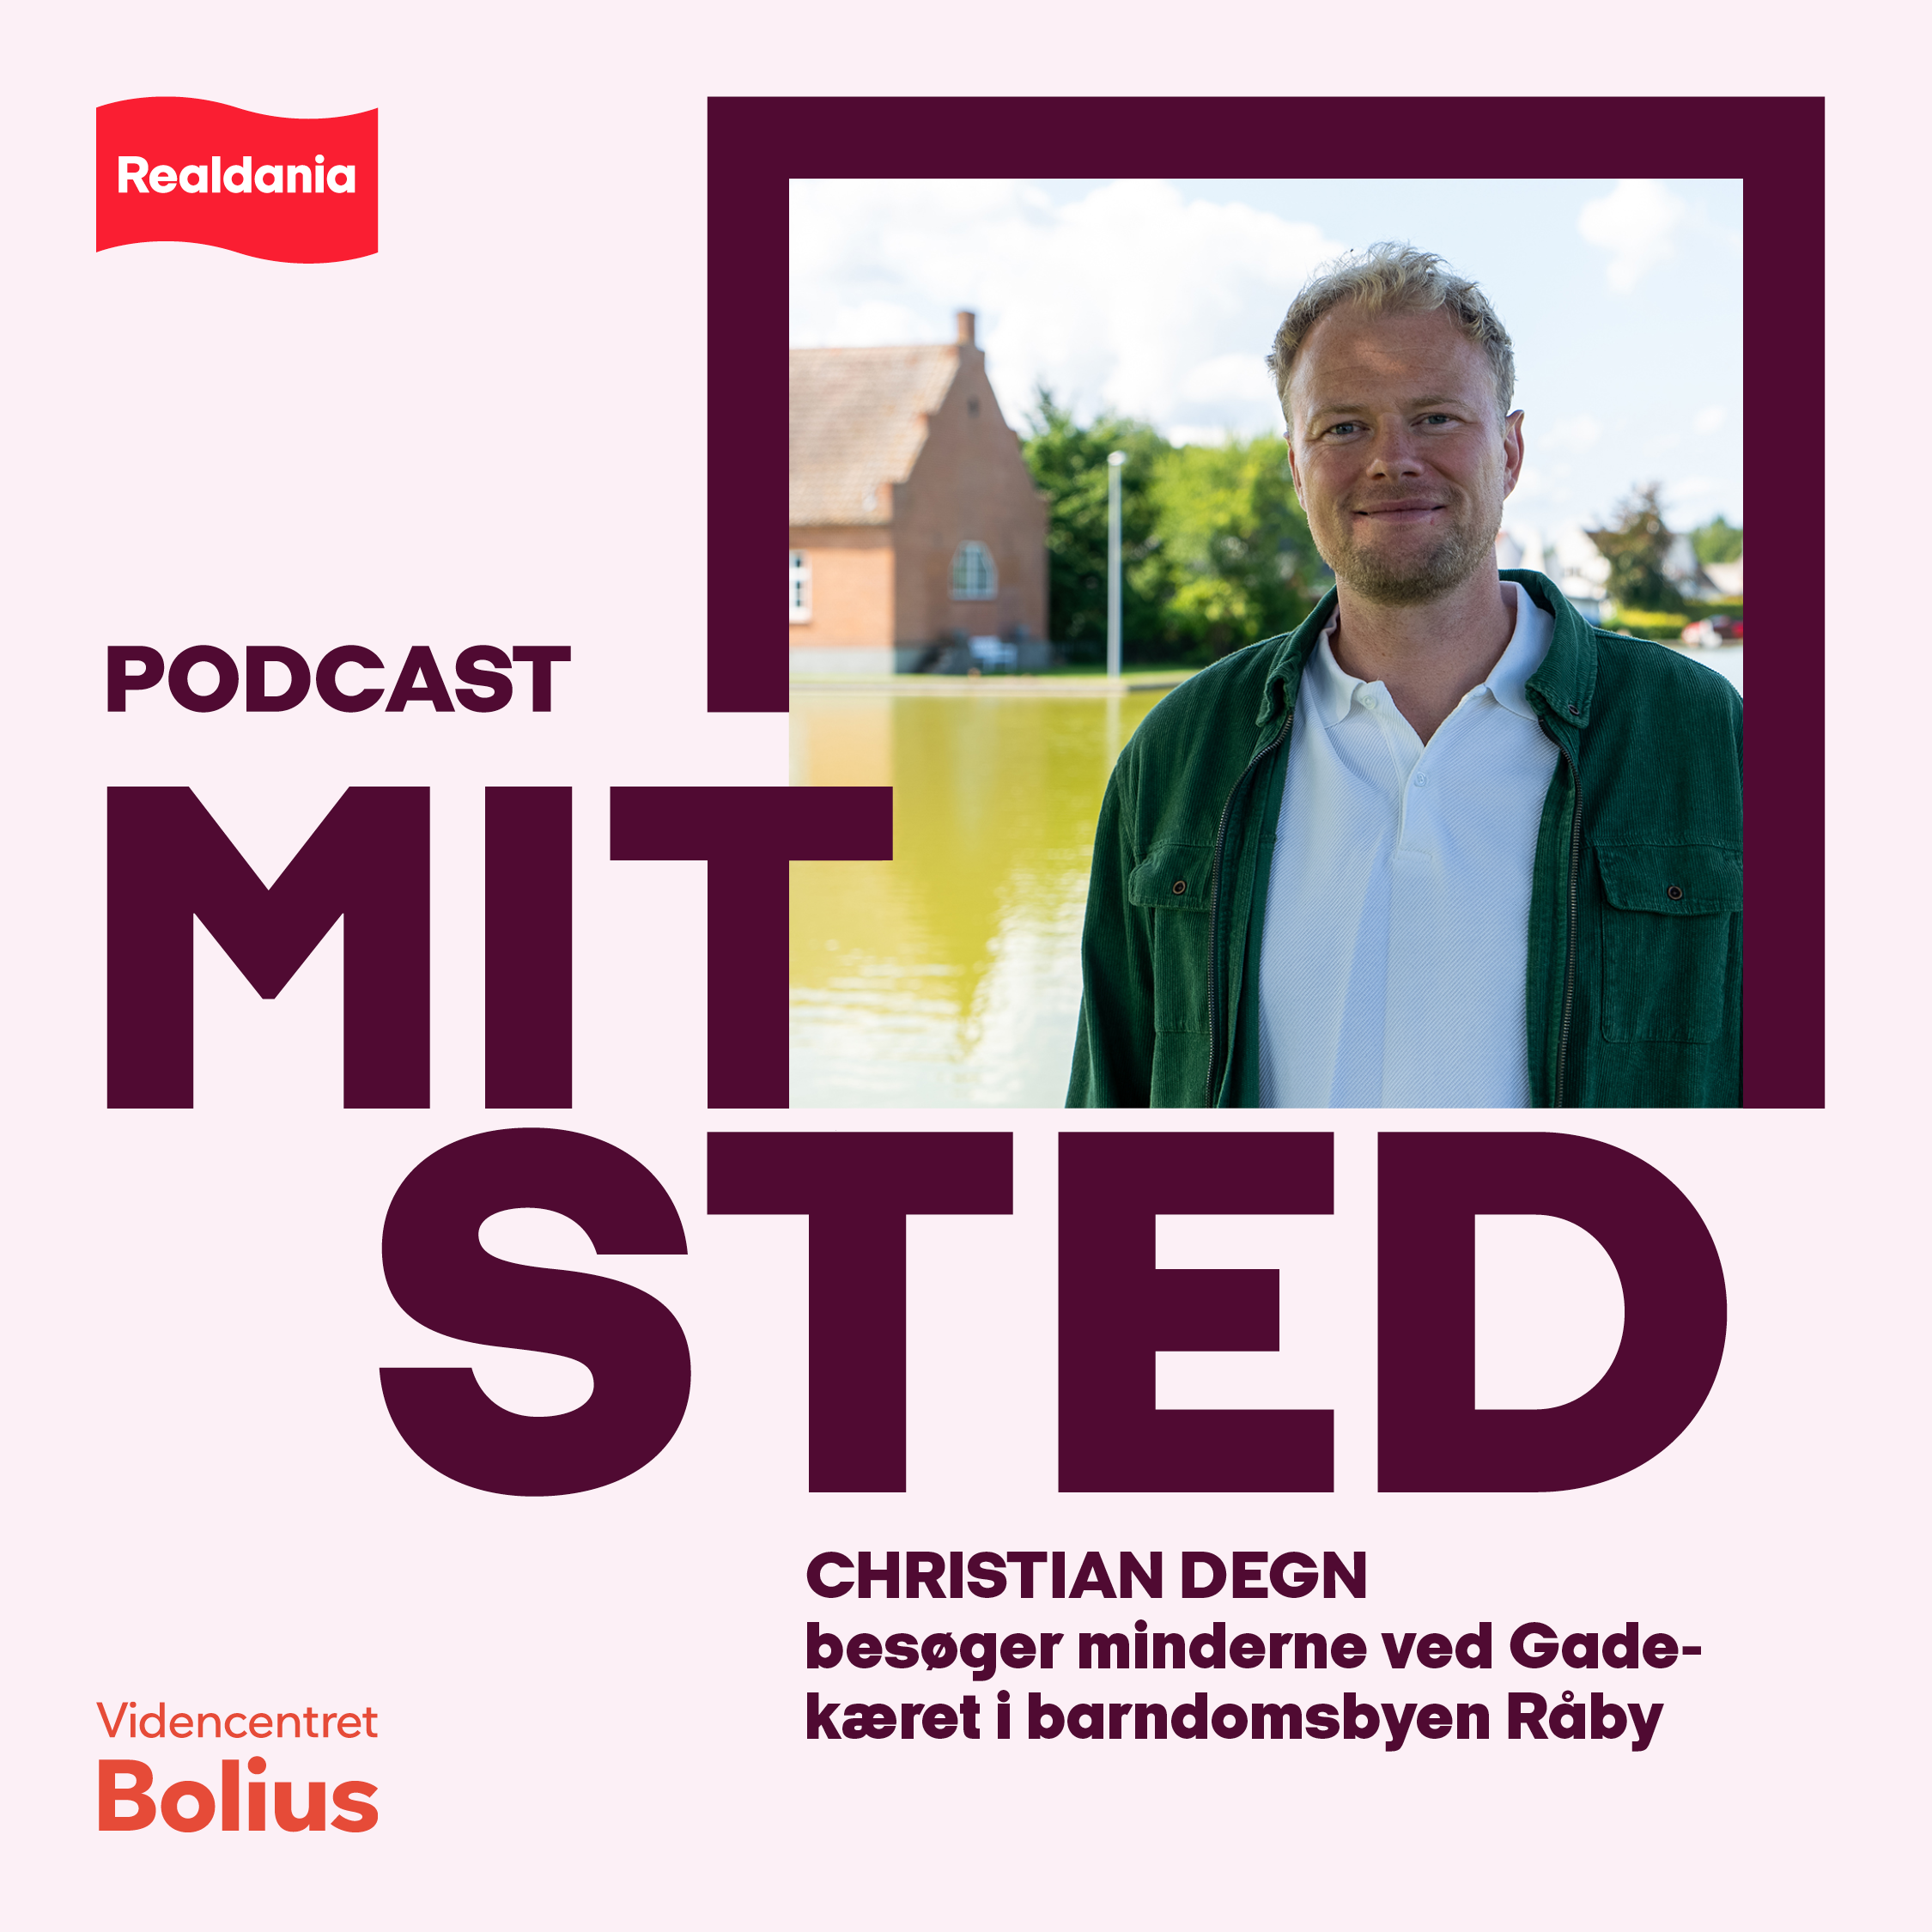 Artwork for podcast Mit sted